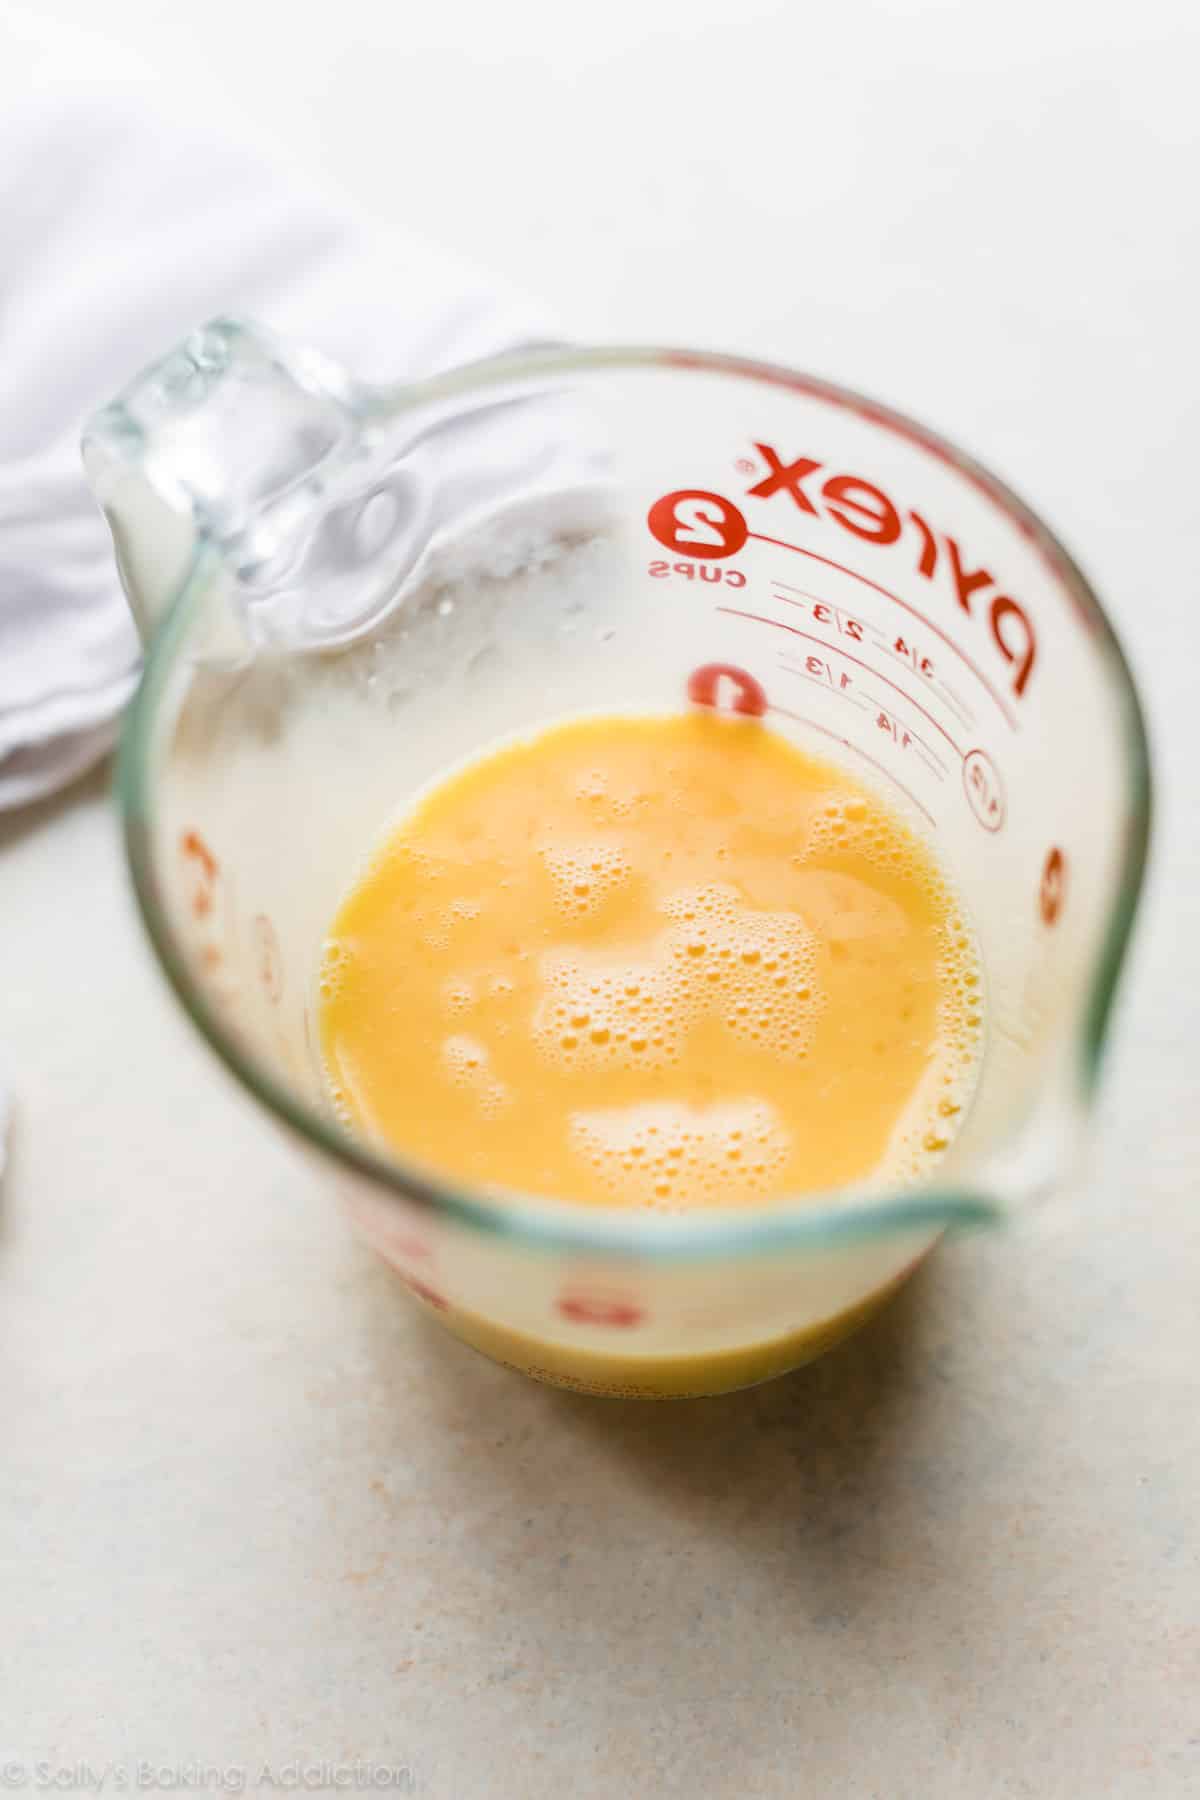 Beaten eggs in a glass measuring cup